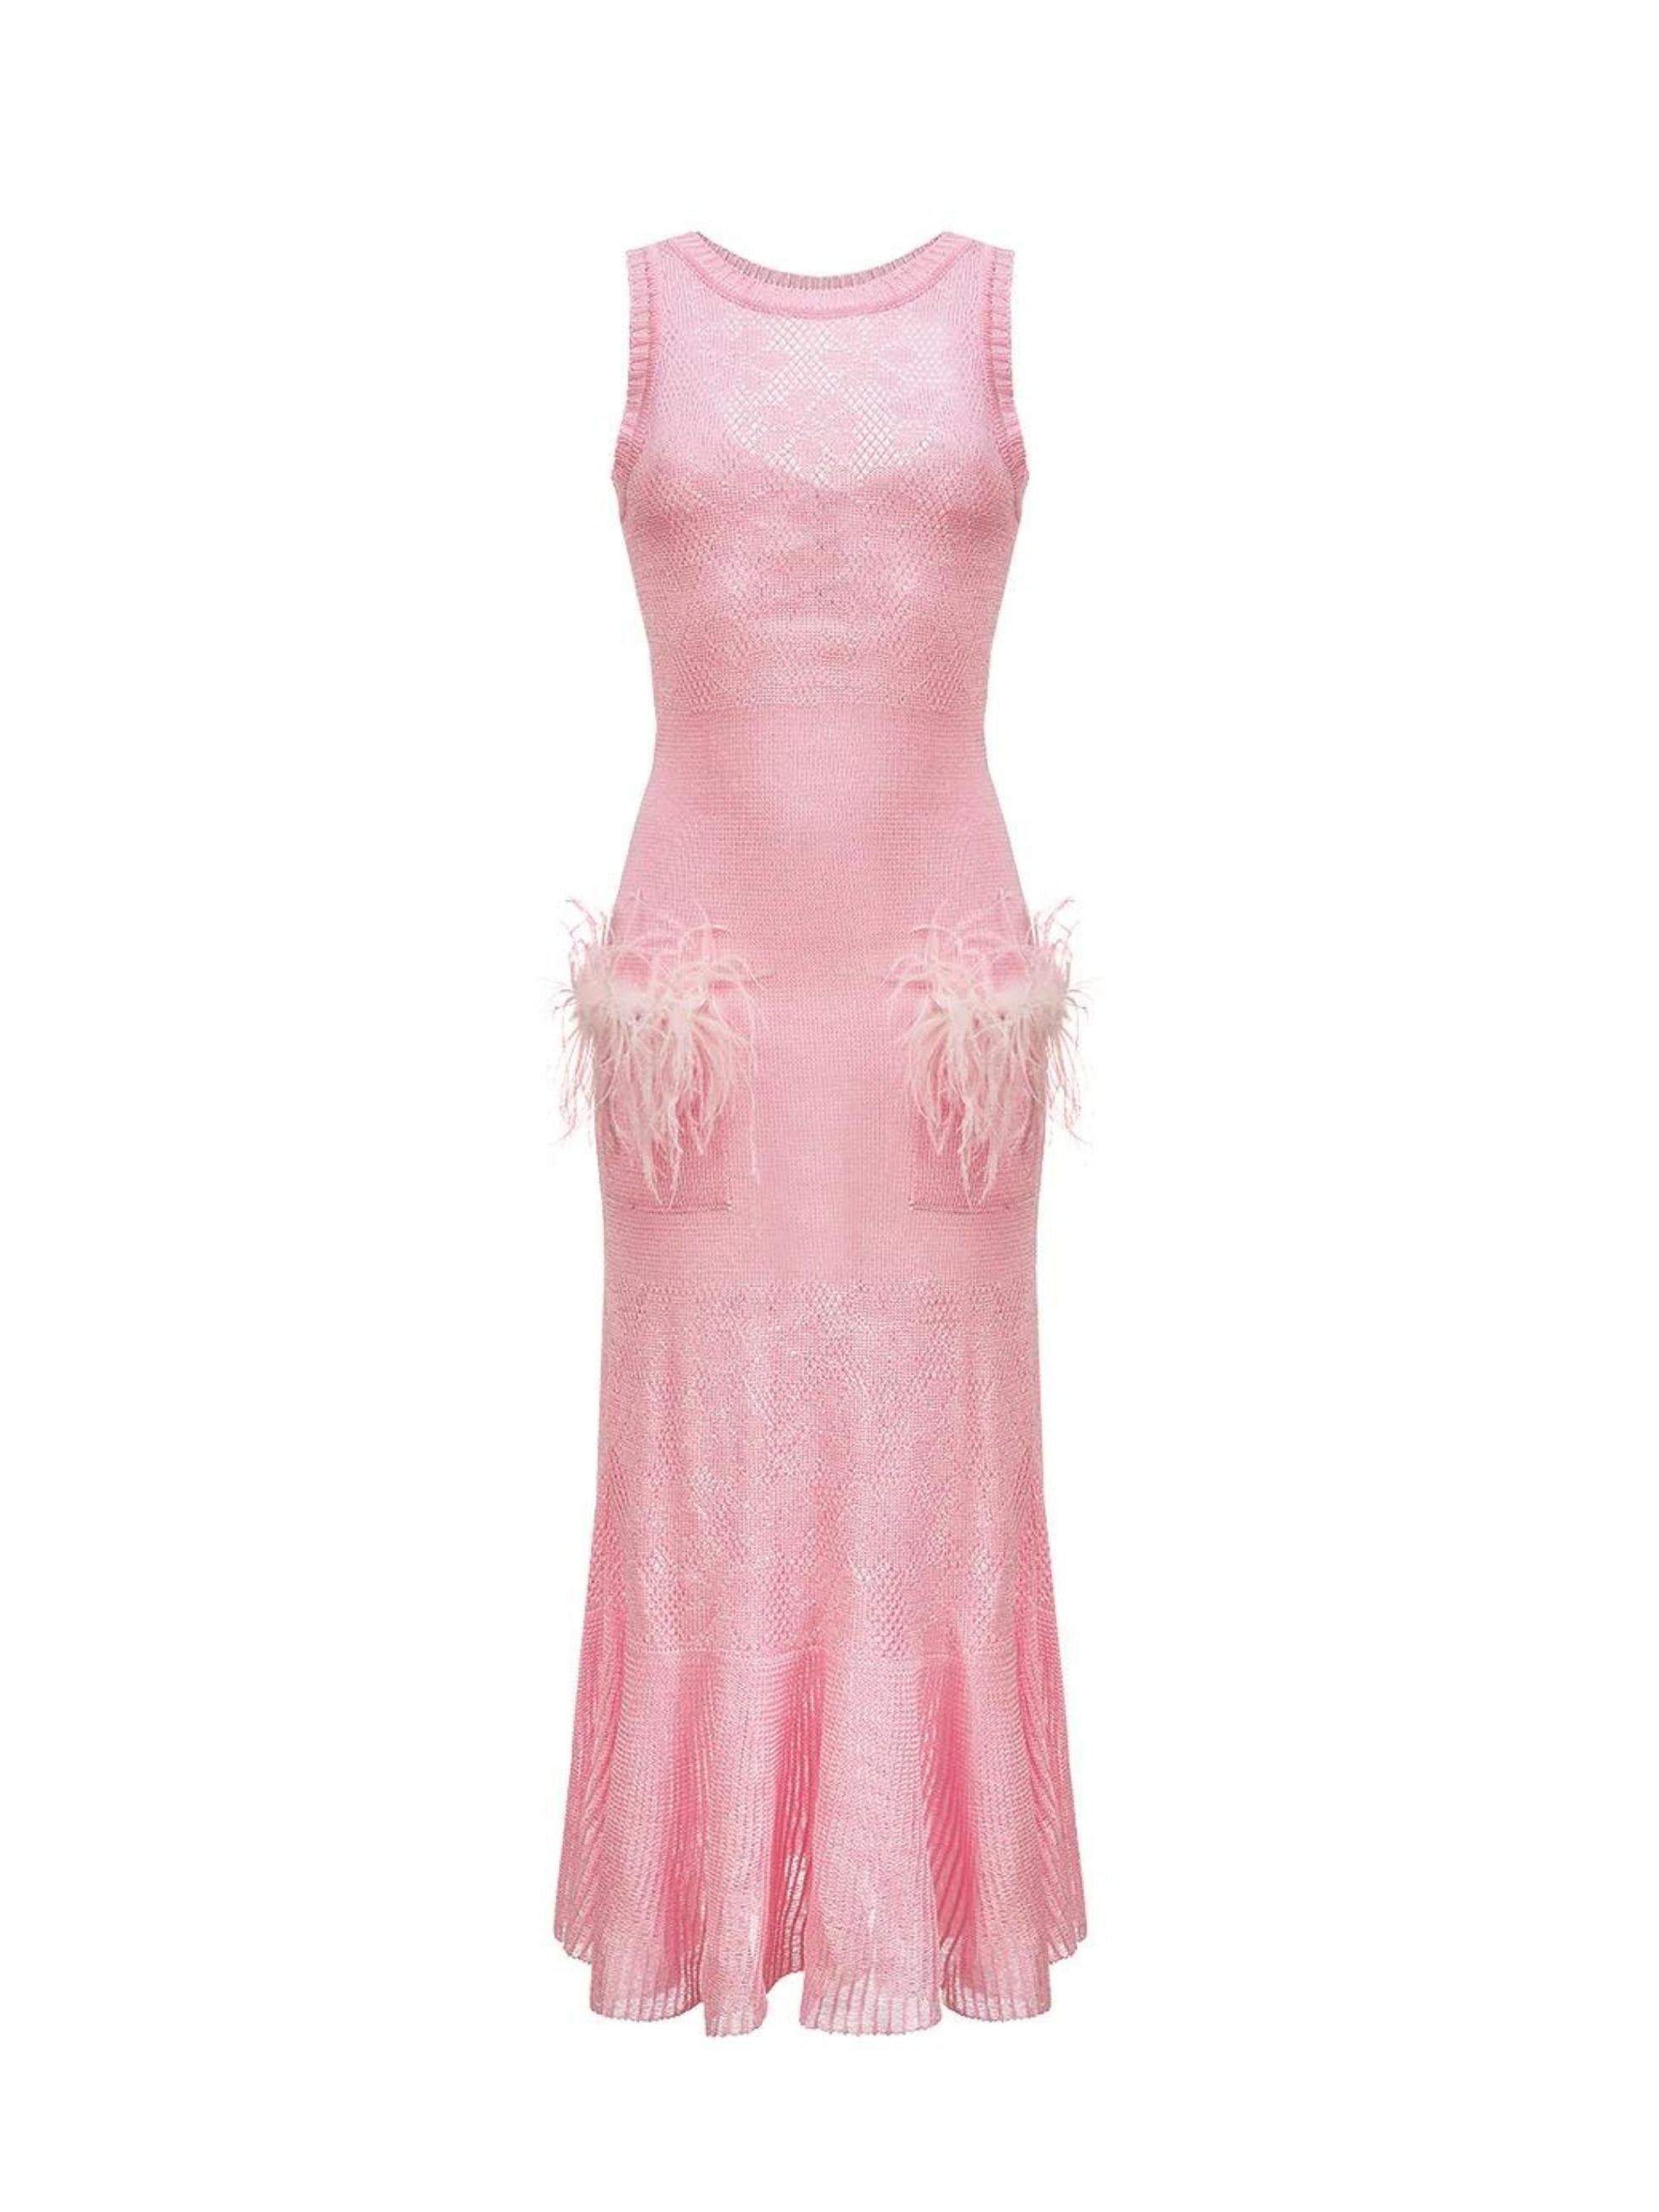 Pink Knit Dress with Feather Details